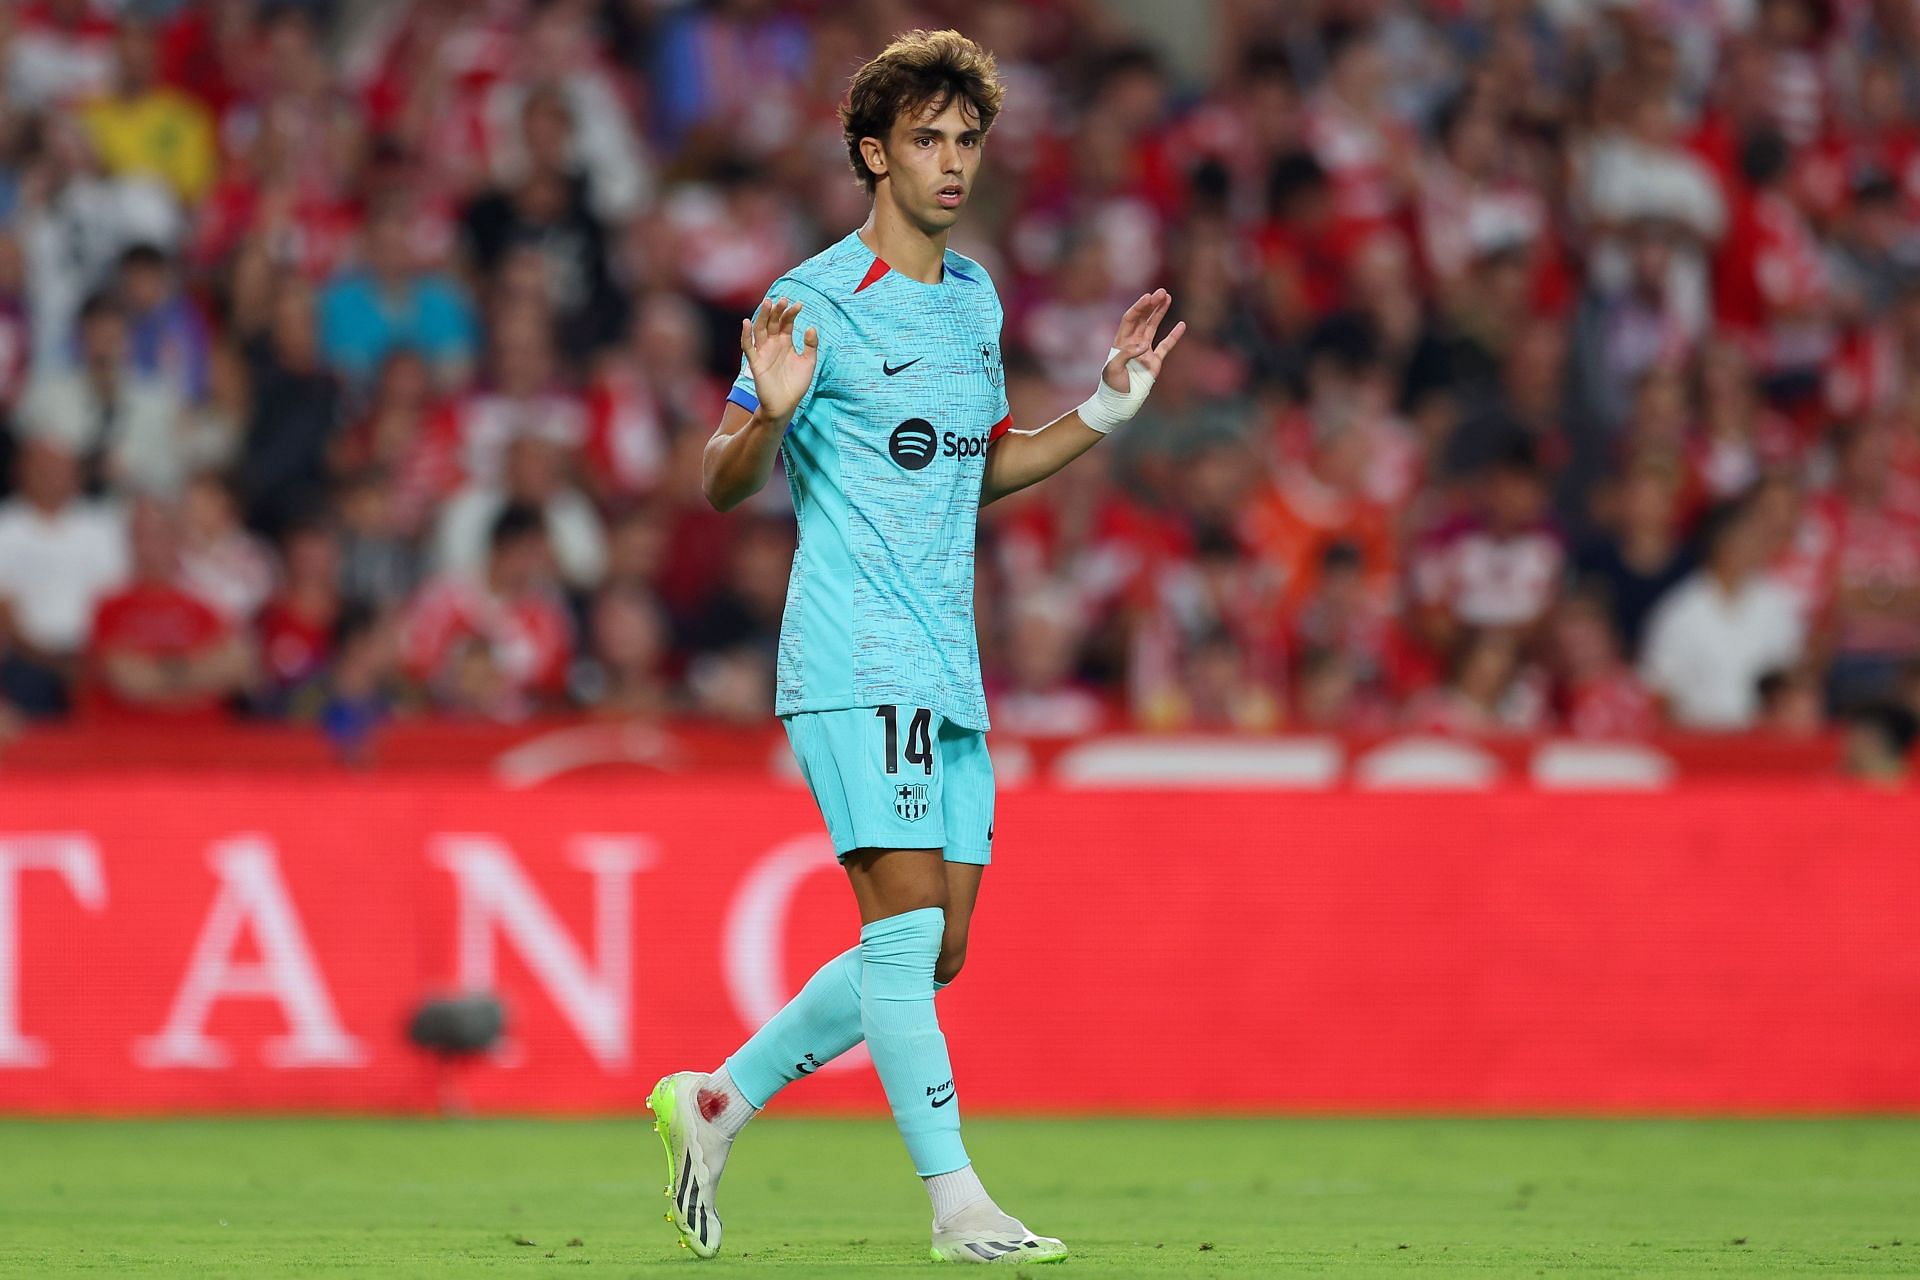 Joao Felix could end up staying permanently at the Camp Nou.